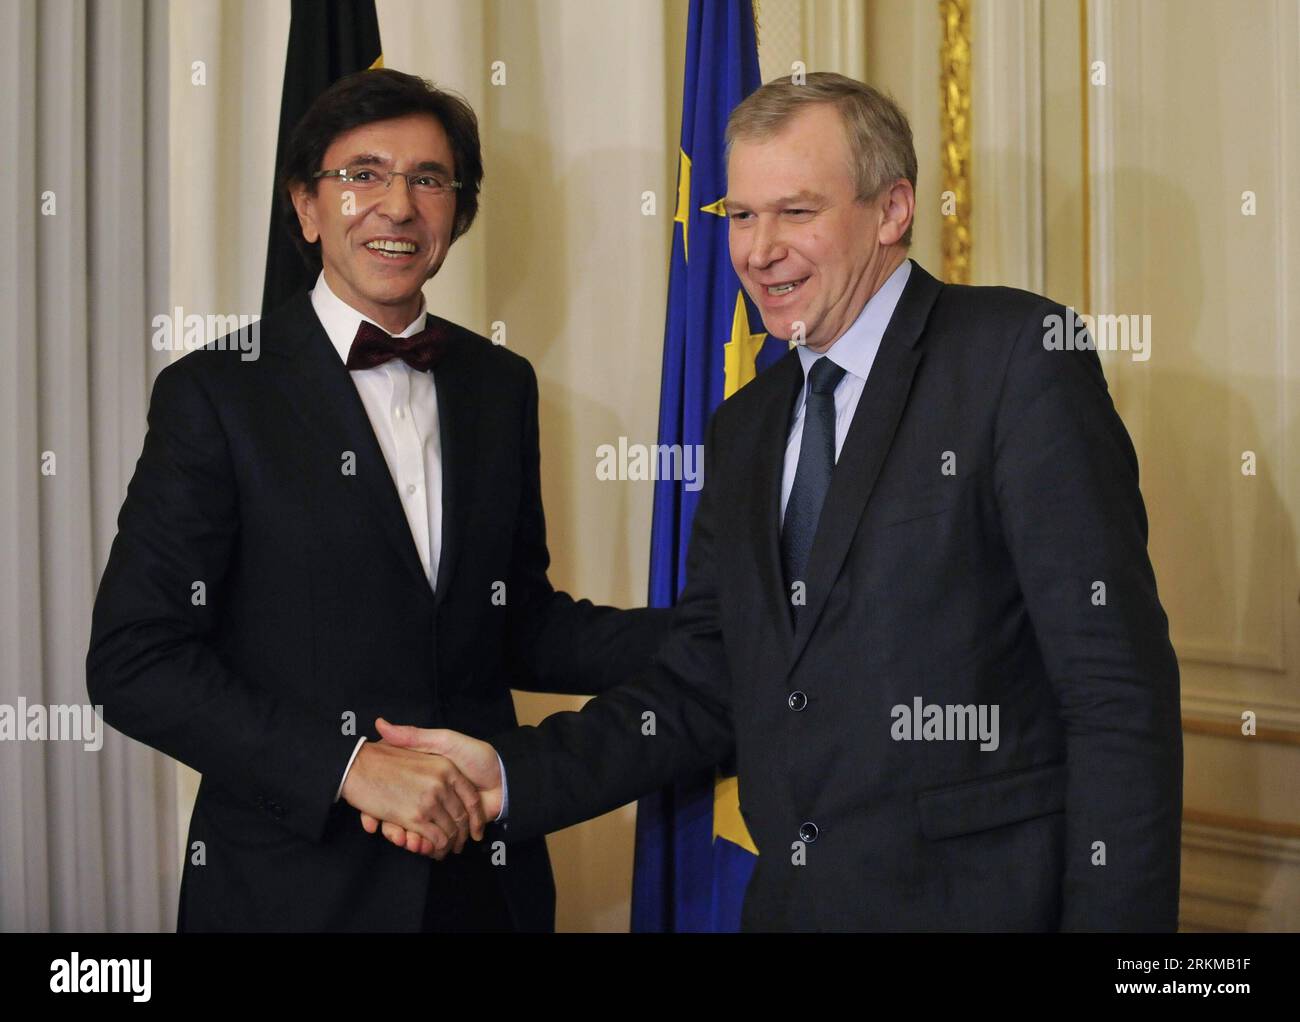 Bildnummer: 56651948  Datum: 06.12.2011  Copyright: imago/Xinhua (111206) -- BRUSSELS, Dec. 6, 2011 (Xinhua) -- Belgian new Prime Minister Elio Di Rupo (L) shakes hands with outgoing Prime Minister Yves Leterme at the Prime Minister s residence in Brussels, capital of Belgium, Dec. 6, 2011. The inauguration of the new government marked the ending of a record 18-months long political deadlock of Belgium. (Xinhua/Ye Pingfan) (ypf) BELGIUM-BRUSSELS-NEW GOVERNMENT PUBLICATIONxNOTxINxCHN People Politik neue Regierung Belgien x0x xtm 2011 quer premiumd      56651948 Date 06 12 2011 Copyright Imago X Stock Photo